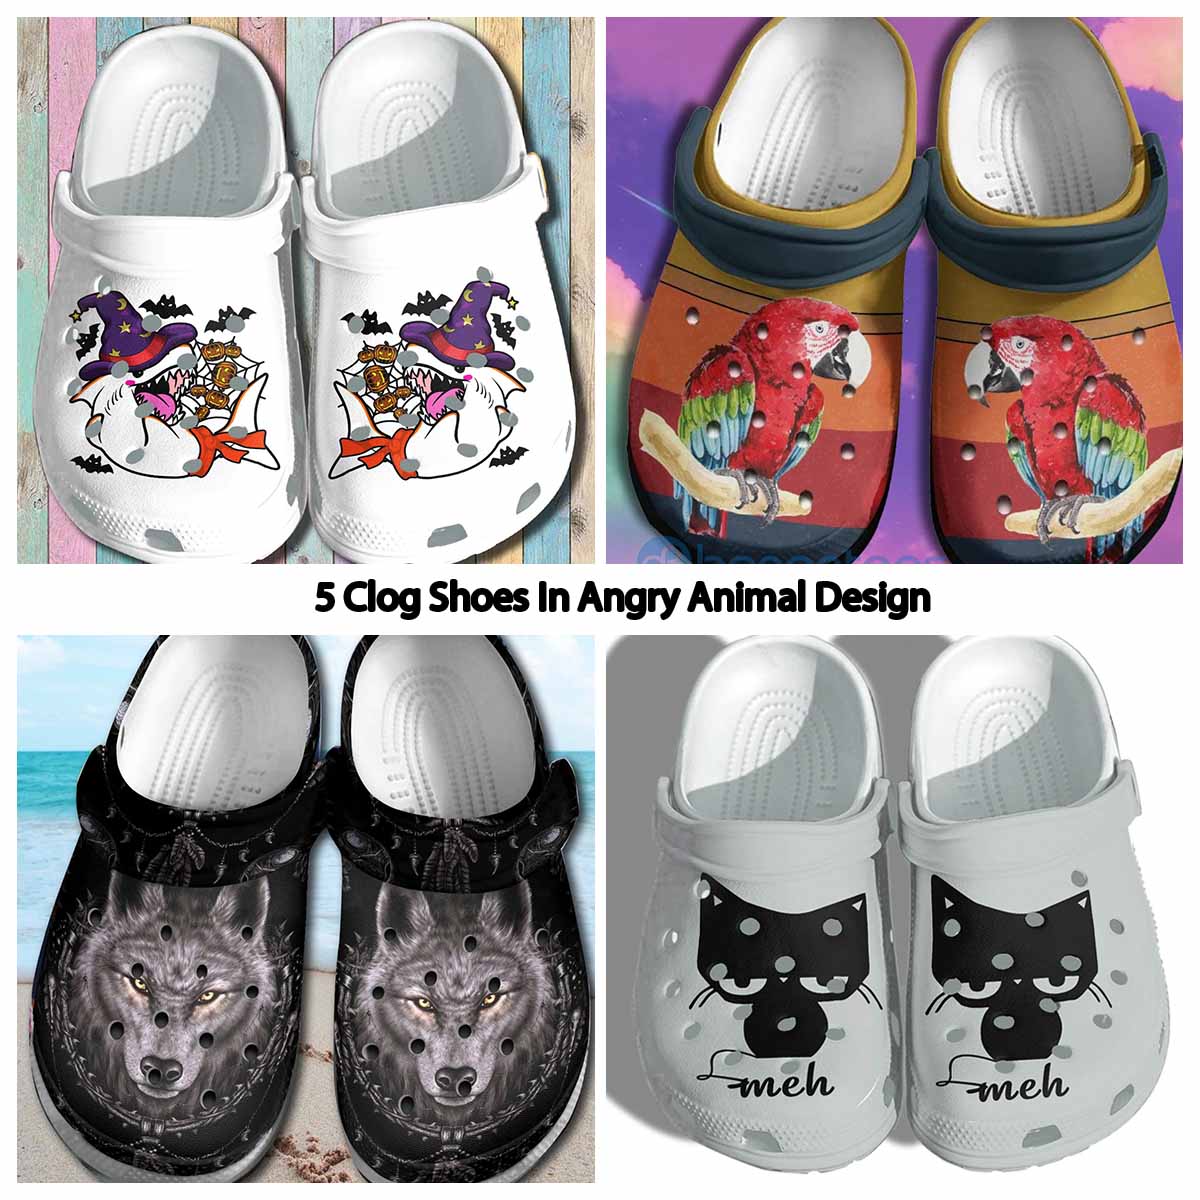 5 Clog Shoes In Angry Animal Design